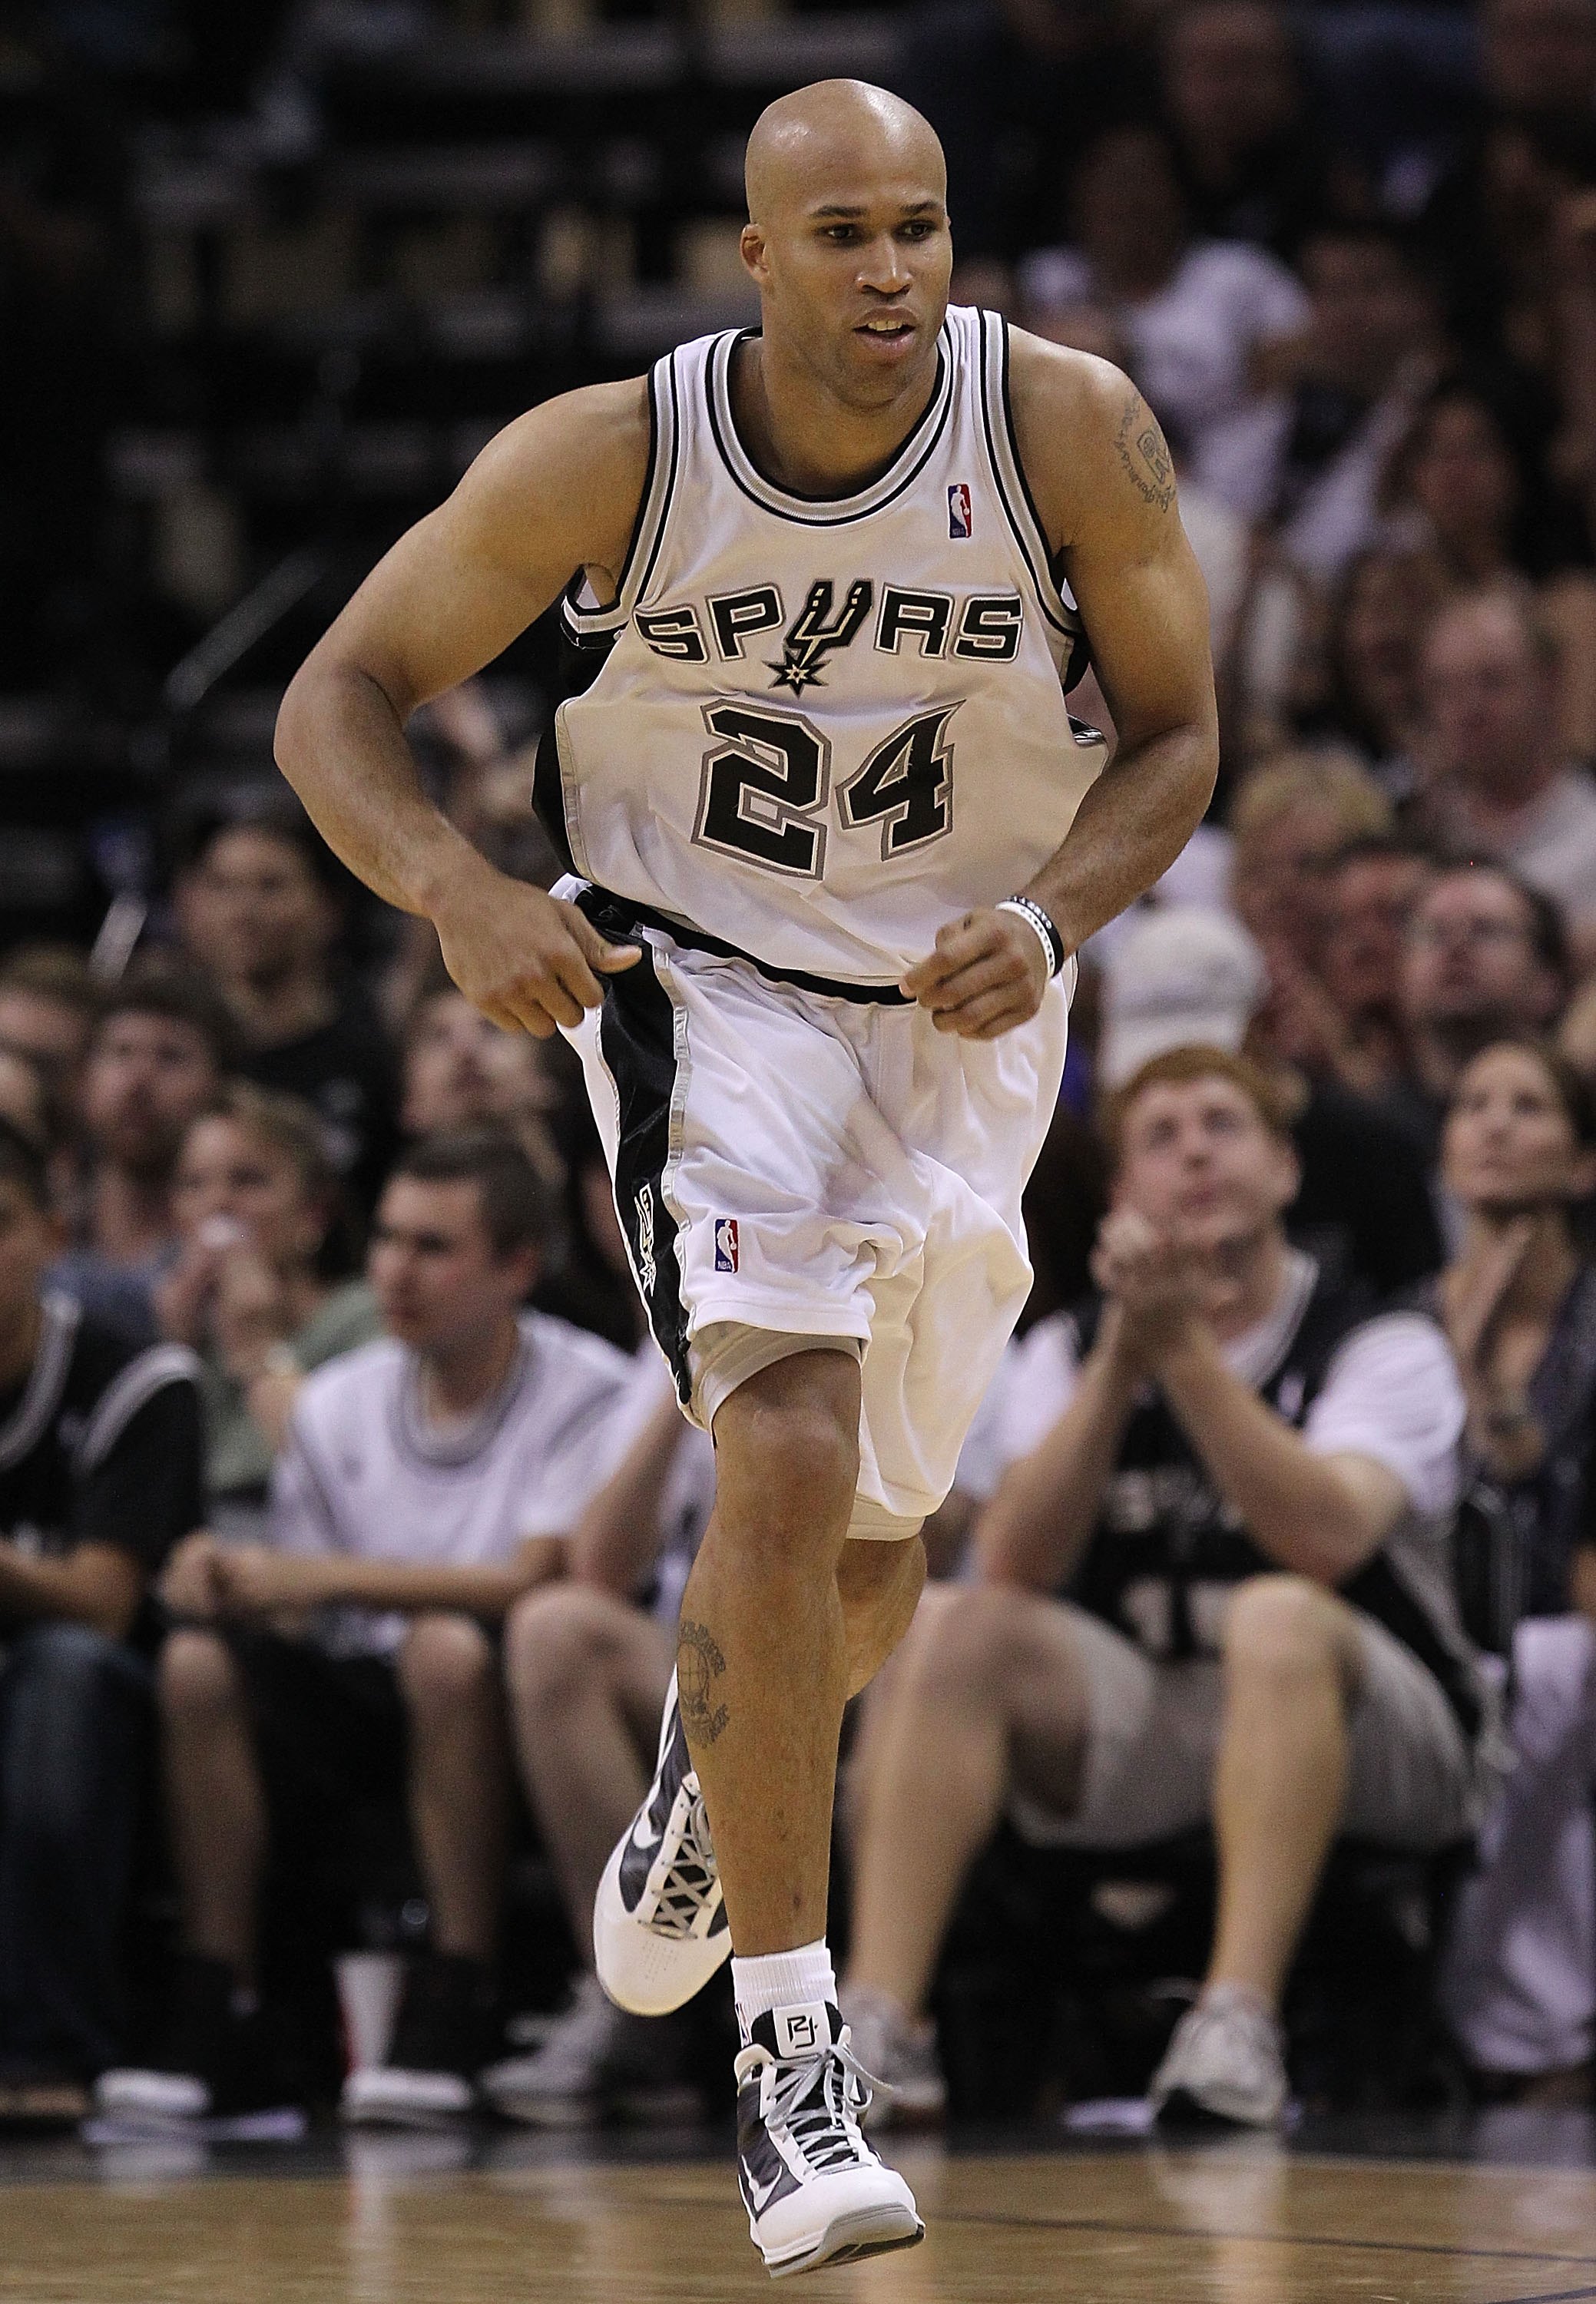 SAN ANTONIO - MAY 09:  Forward Richard Jefferson #24 of the San Antonio Spurs in Game Four of the Western Conference Semifinals during the 2010 NBA Playoffs at AT&T Center on May 9, 2010 in San Antonio, Texas. NOTE TO USER: User expressly acknowledges and